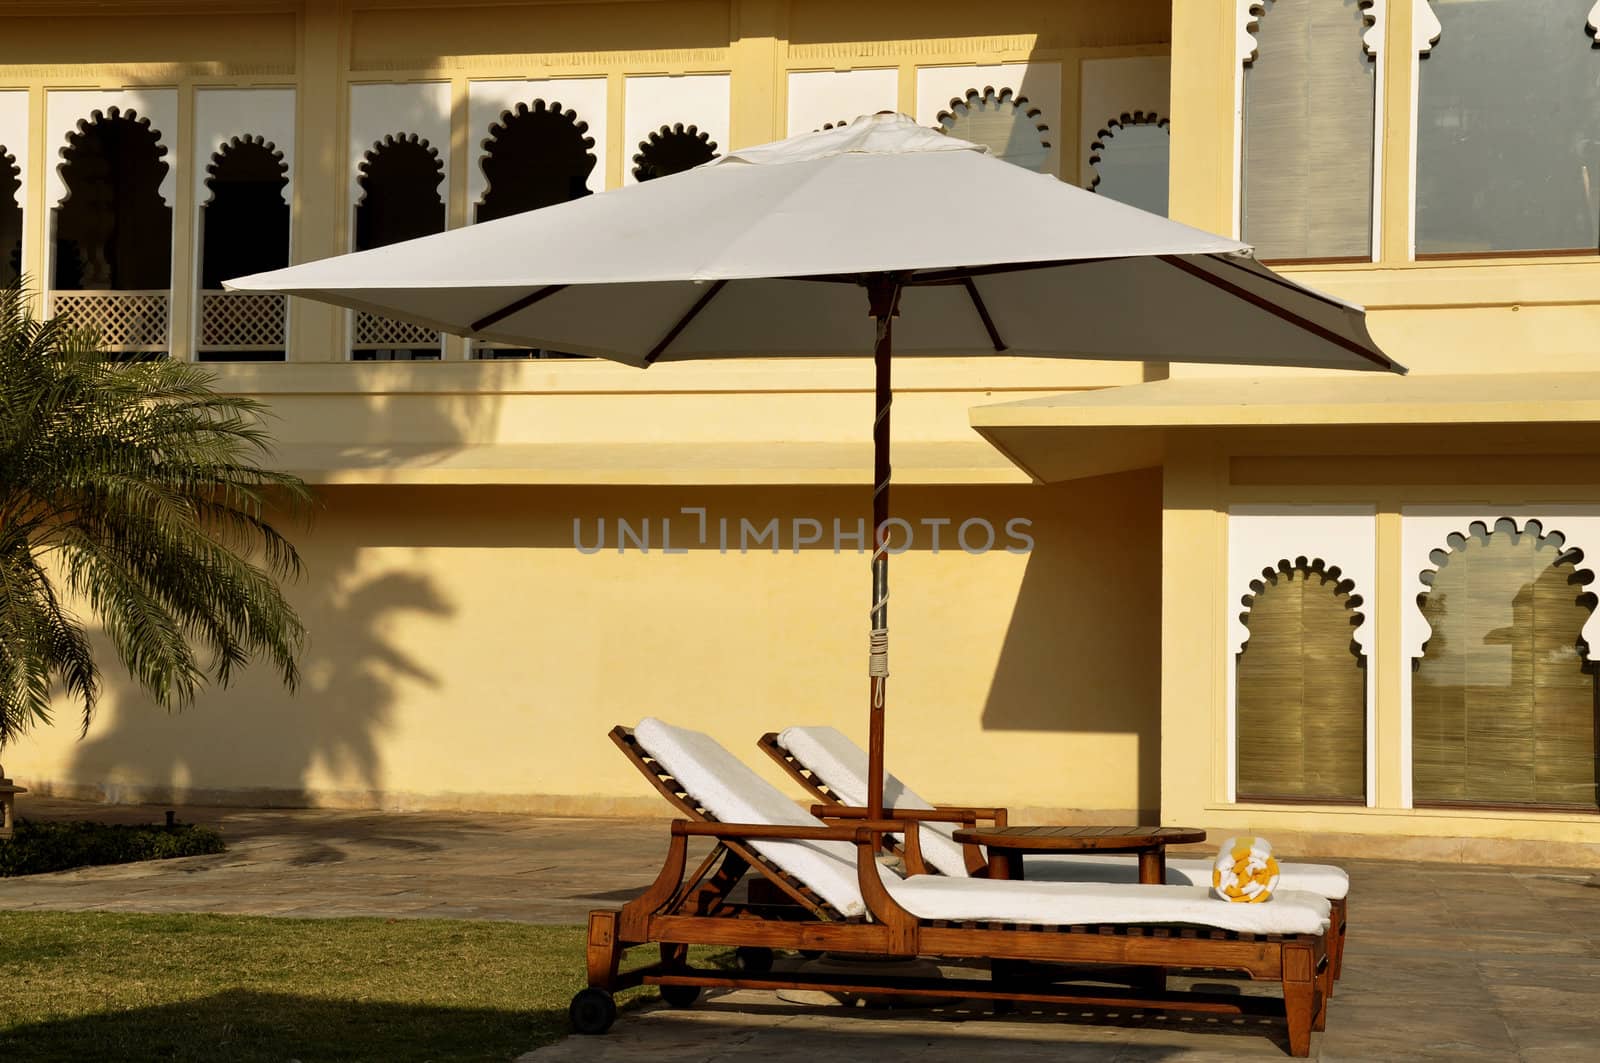 Sunbeds against medieval architecture in Udaipur, India by kdreams02